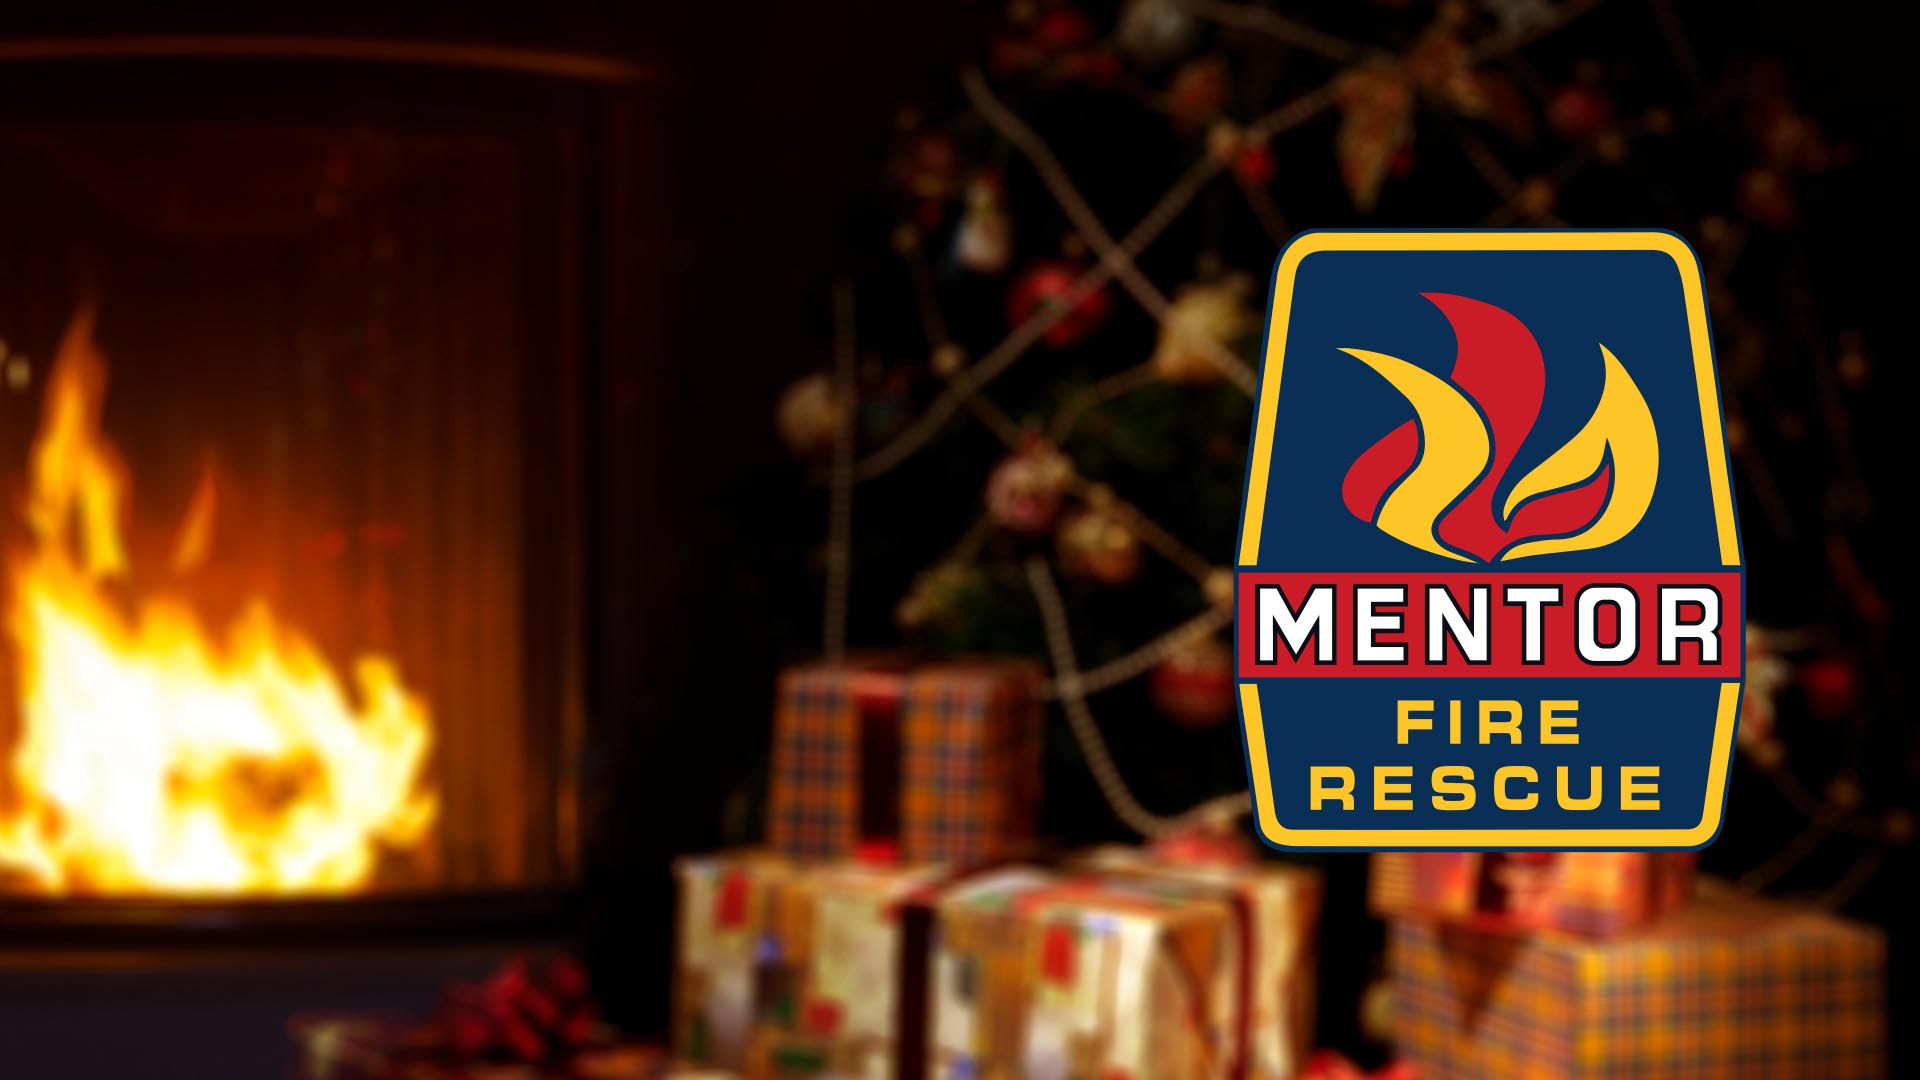 Happy Holidays from Mentor Fire Rescue